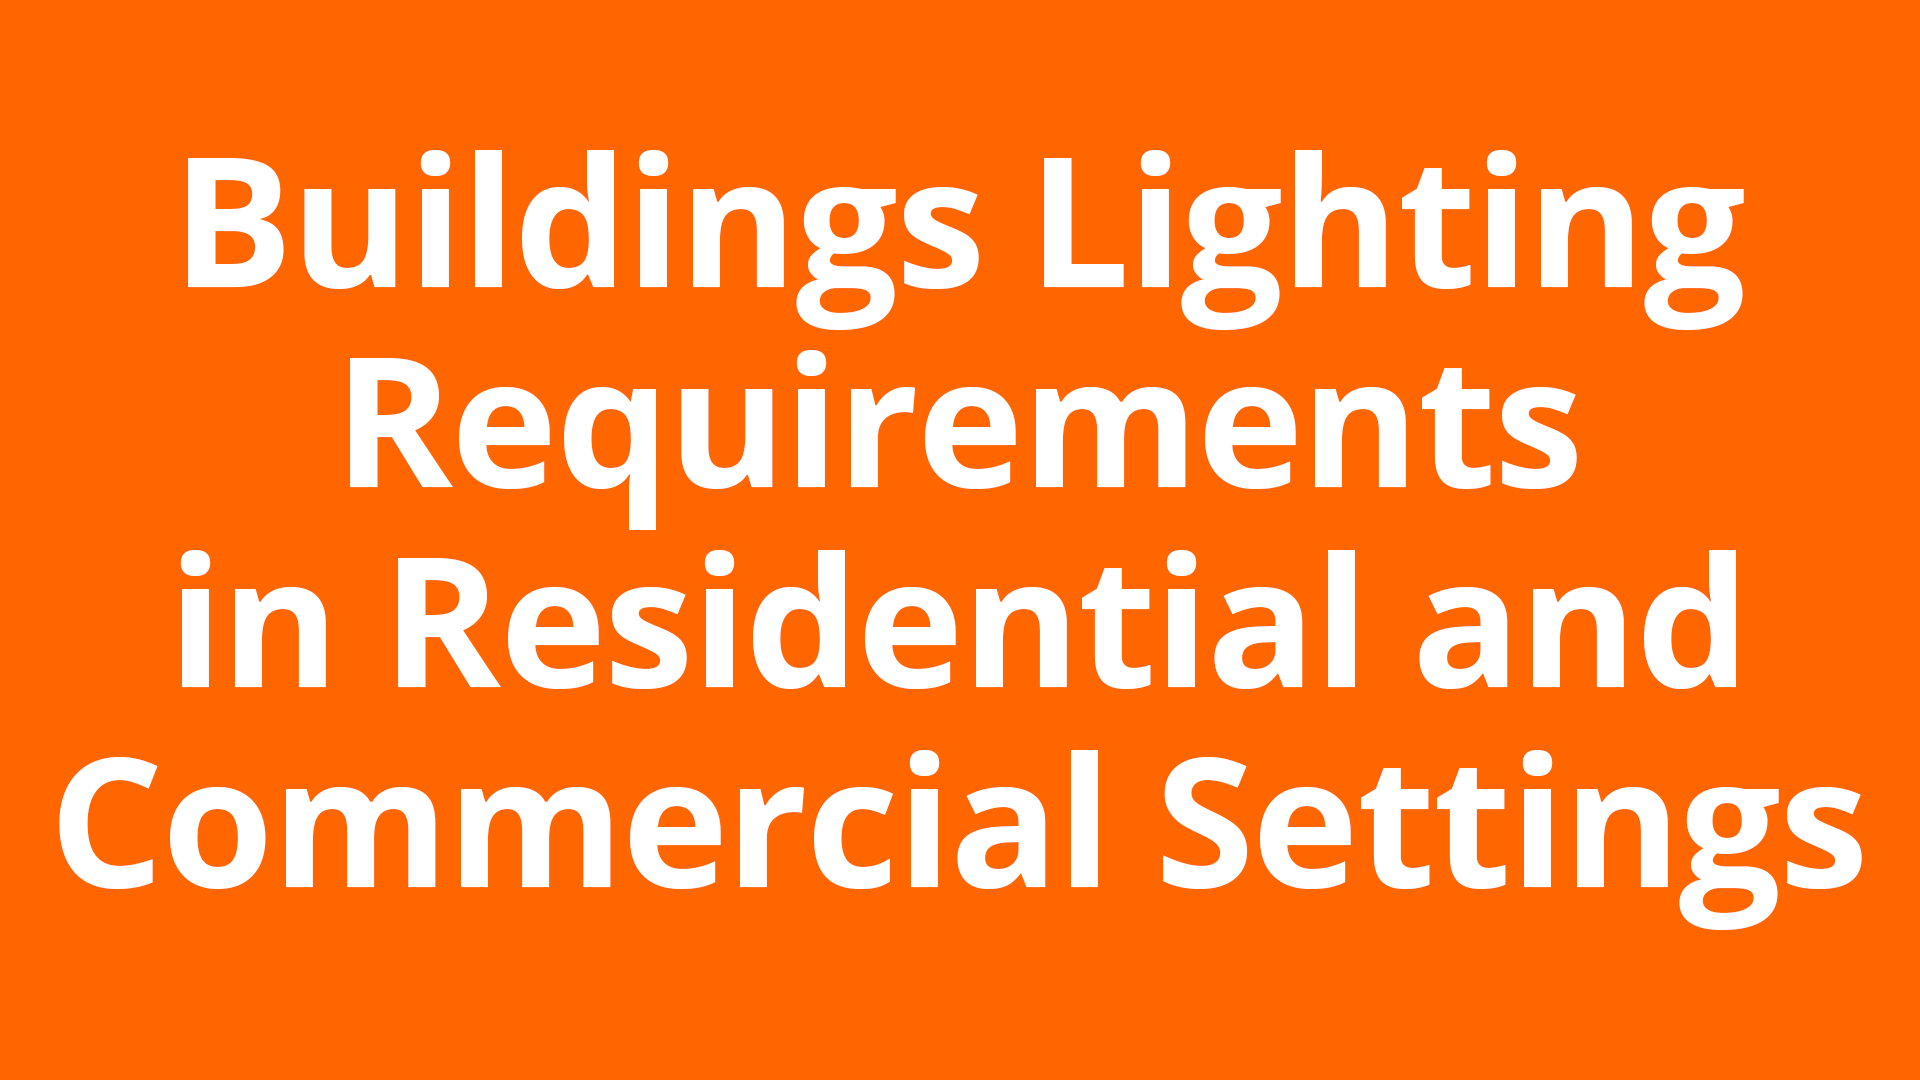 Buildings Lighting Requirements in Residential and Commercial Settings